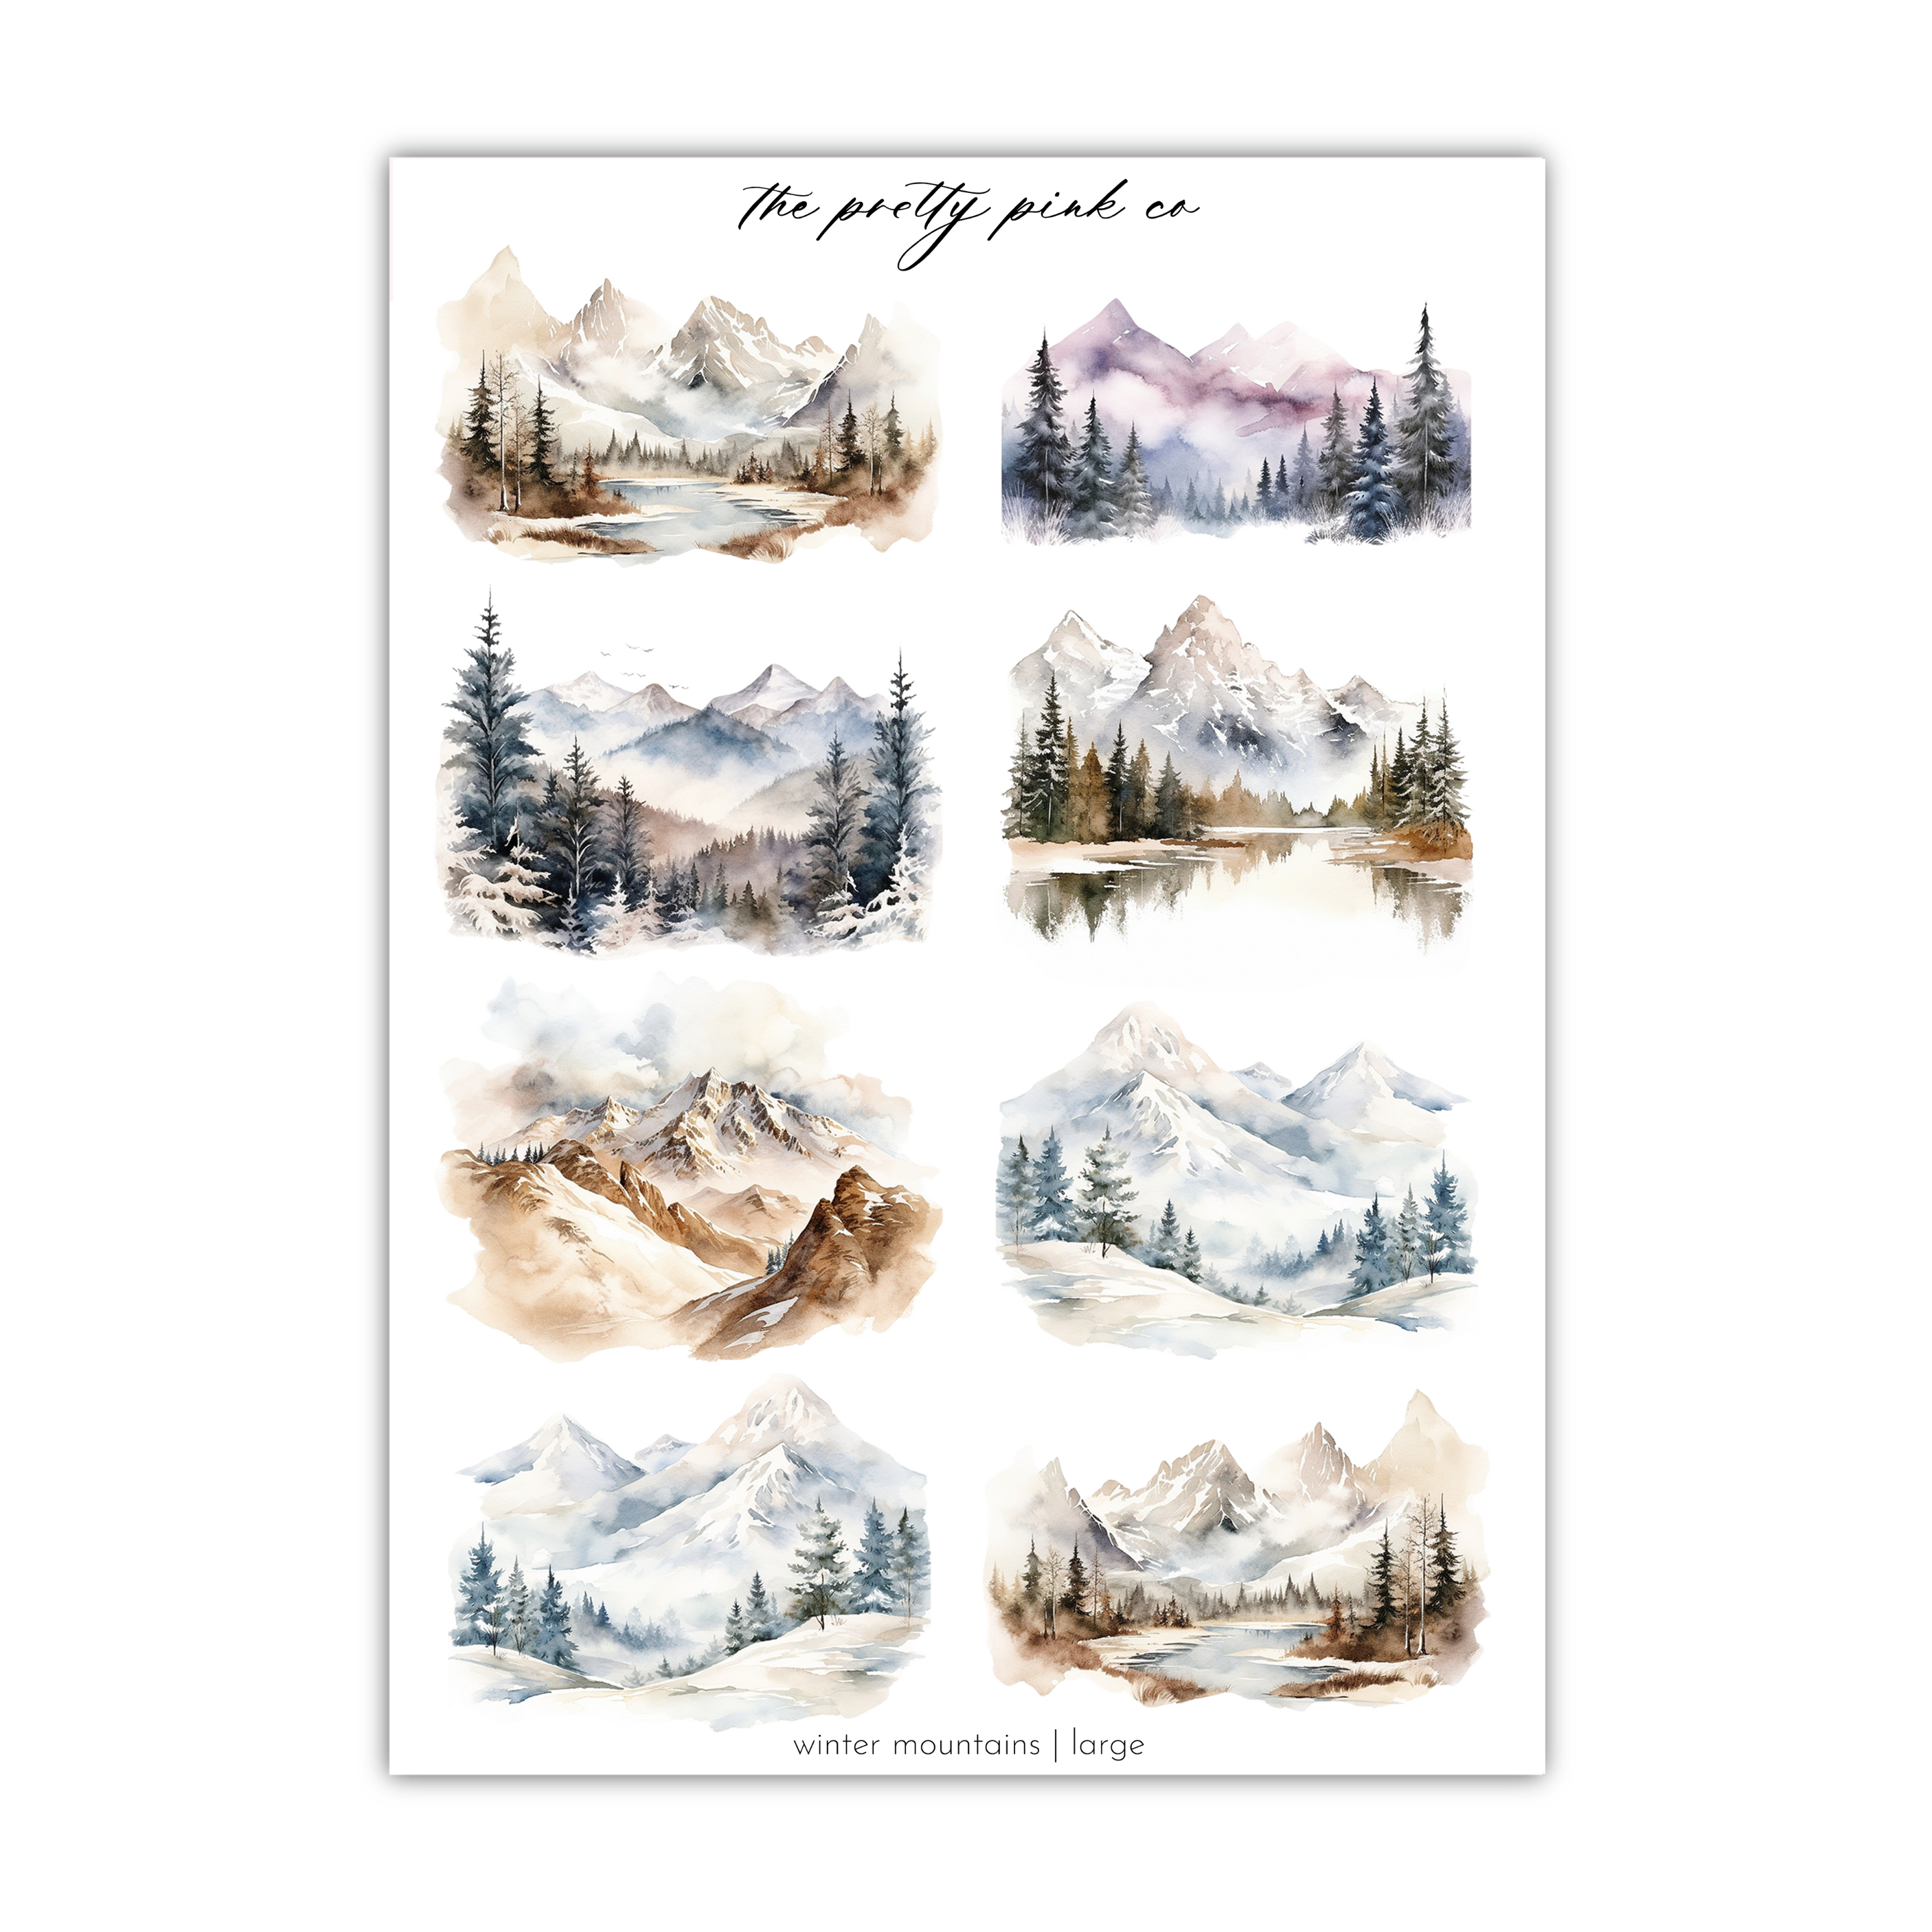 a watercolor painting of mountains and trees